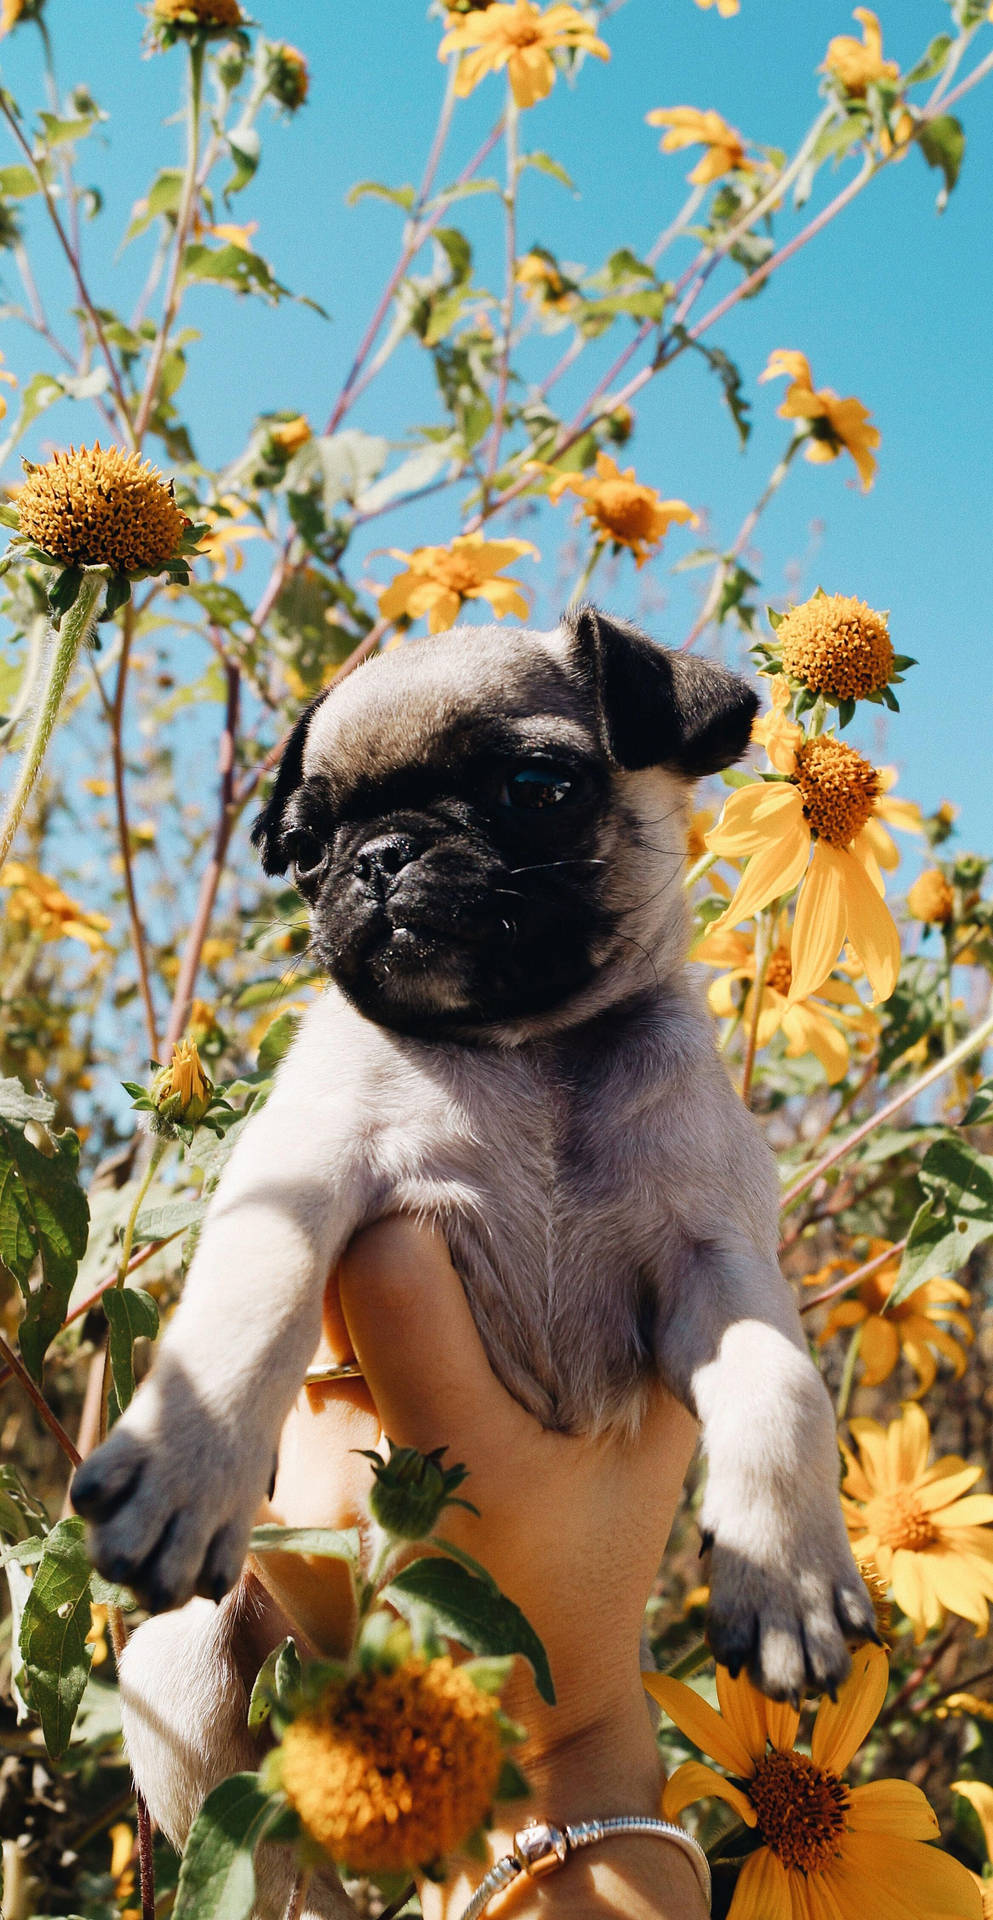 Sun-loving Cutie -a Pug Pup And His Sunflowers Background